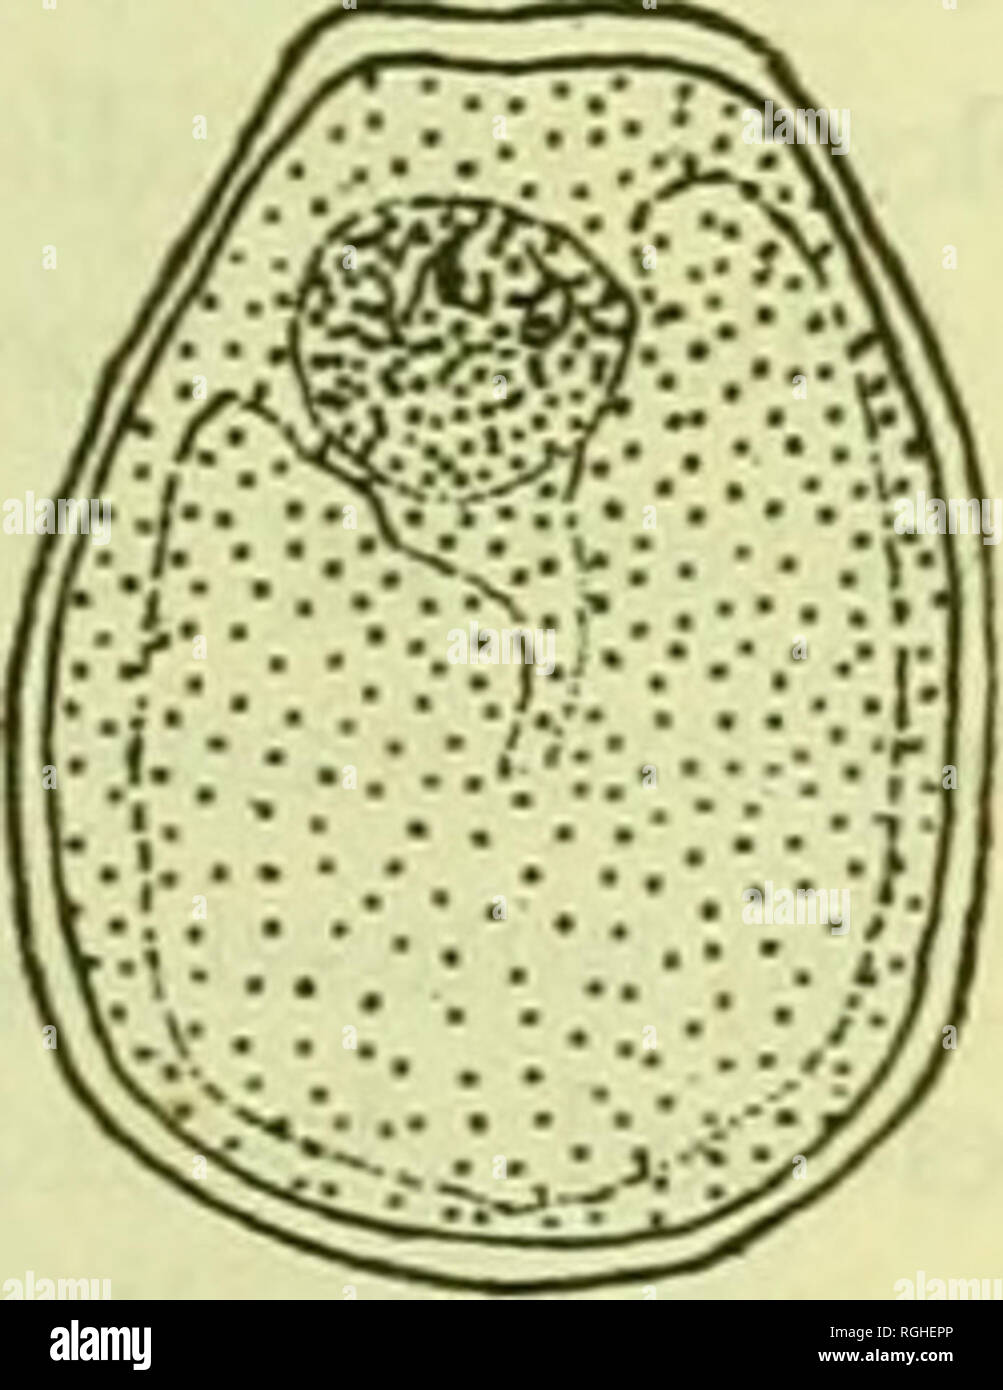 . Bulletin of the Bureau of Fisheries. Fisheries; Fish culture. Fig. II.—Glochidia of commoa fresh-water mussels. (After Surber. 1912 and 1915-) a and 6, Proptera alata. c, ProPtera caPax. d, ProPUralaevissima. e and /, ProPtera Purpuraia. g, Quadrula coccinea. k, Quadrula cbenus. i, Quadrula ffrani/era. j, Quadrula keros. k, Qucdrulalachrytnosa. I, Quadrula Tnetanevra. m, Quadrula obligua. n, Quadrula plicata. o, Quadrula pustulata. P. Quadrula pusiulosa. q, Quadrula solida. r, Quadrula undata.. Please note that these images are extracted from scanned page images that may have been digitally  Stock Photo